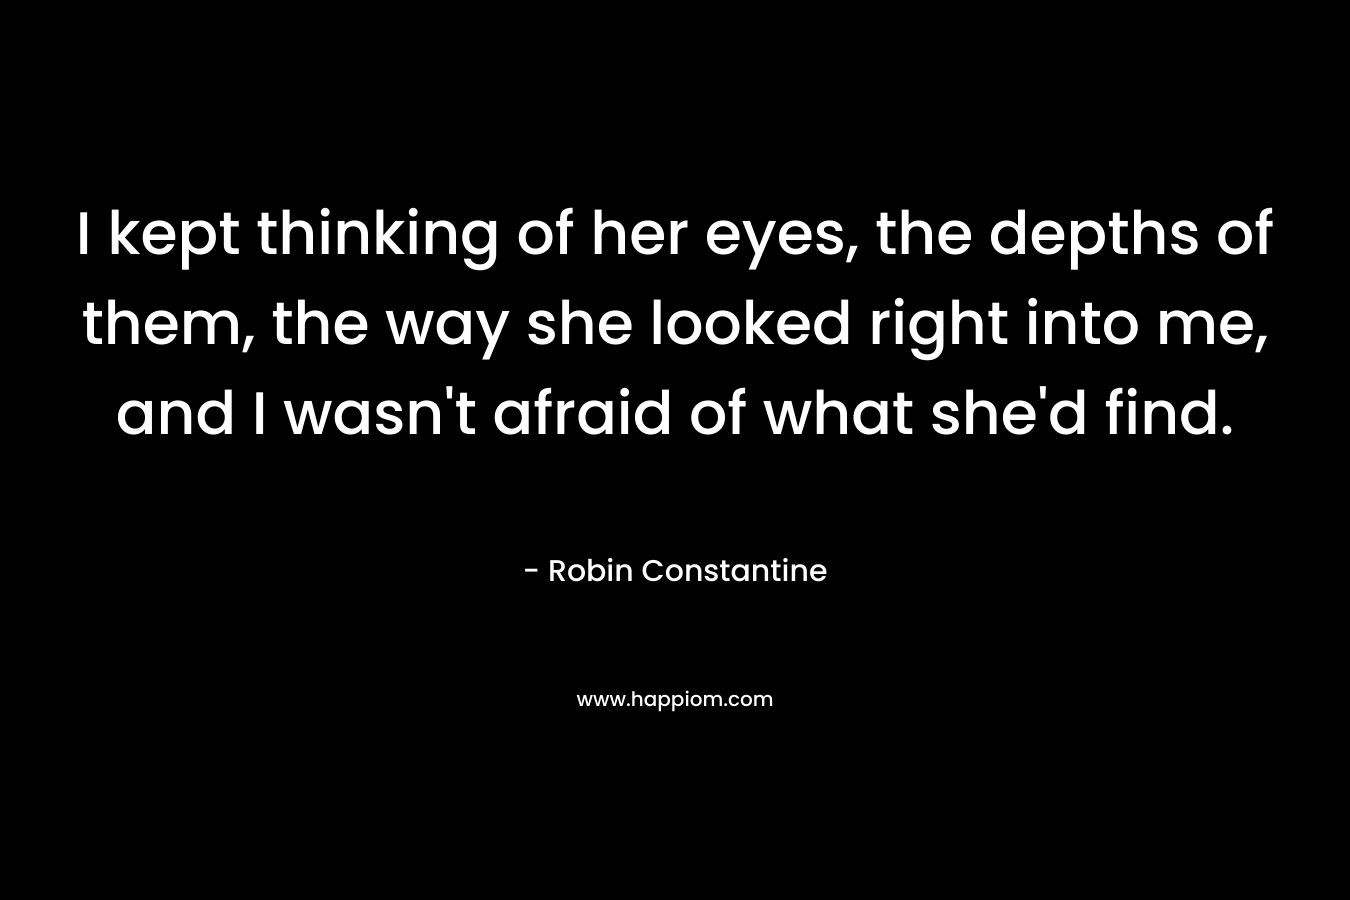 I kept thinking of her eyes, the depths of them, the way she looked right into me, and I wasn’t afraid of what she’d find. – Robin Constantine